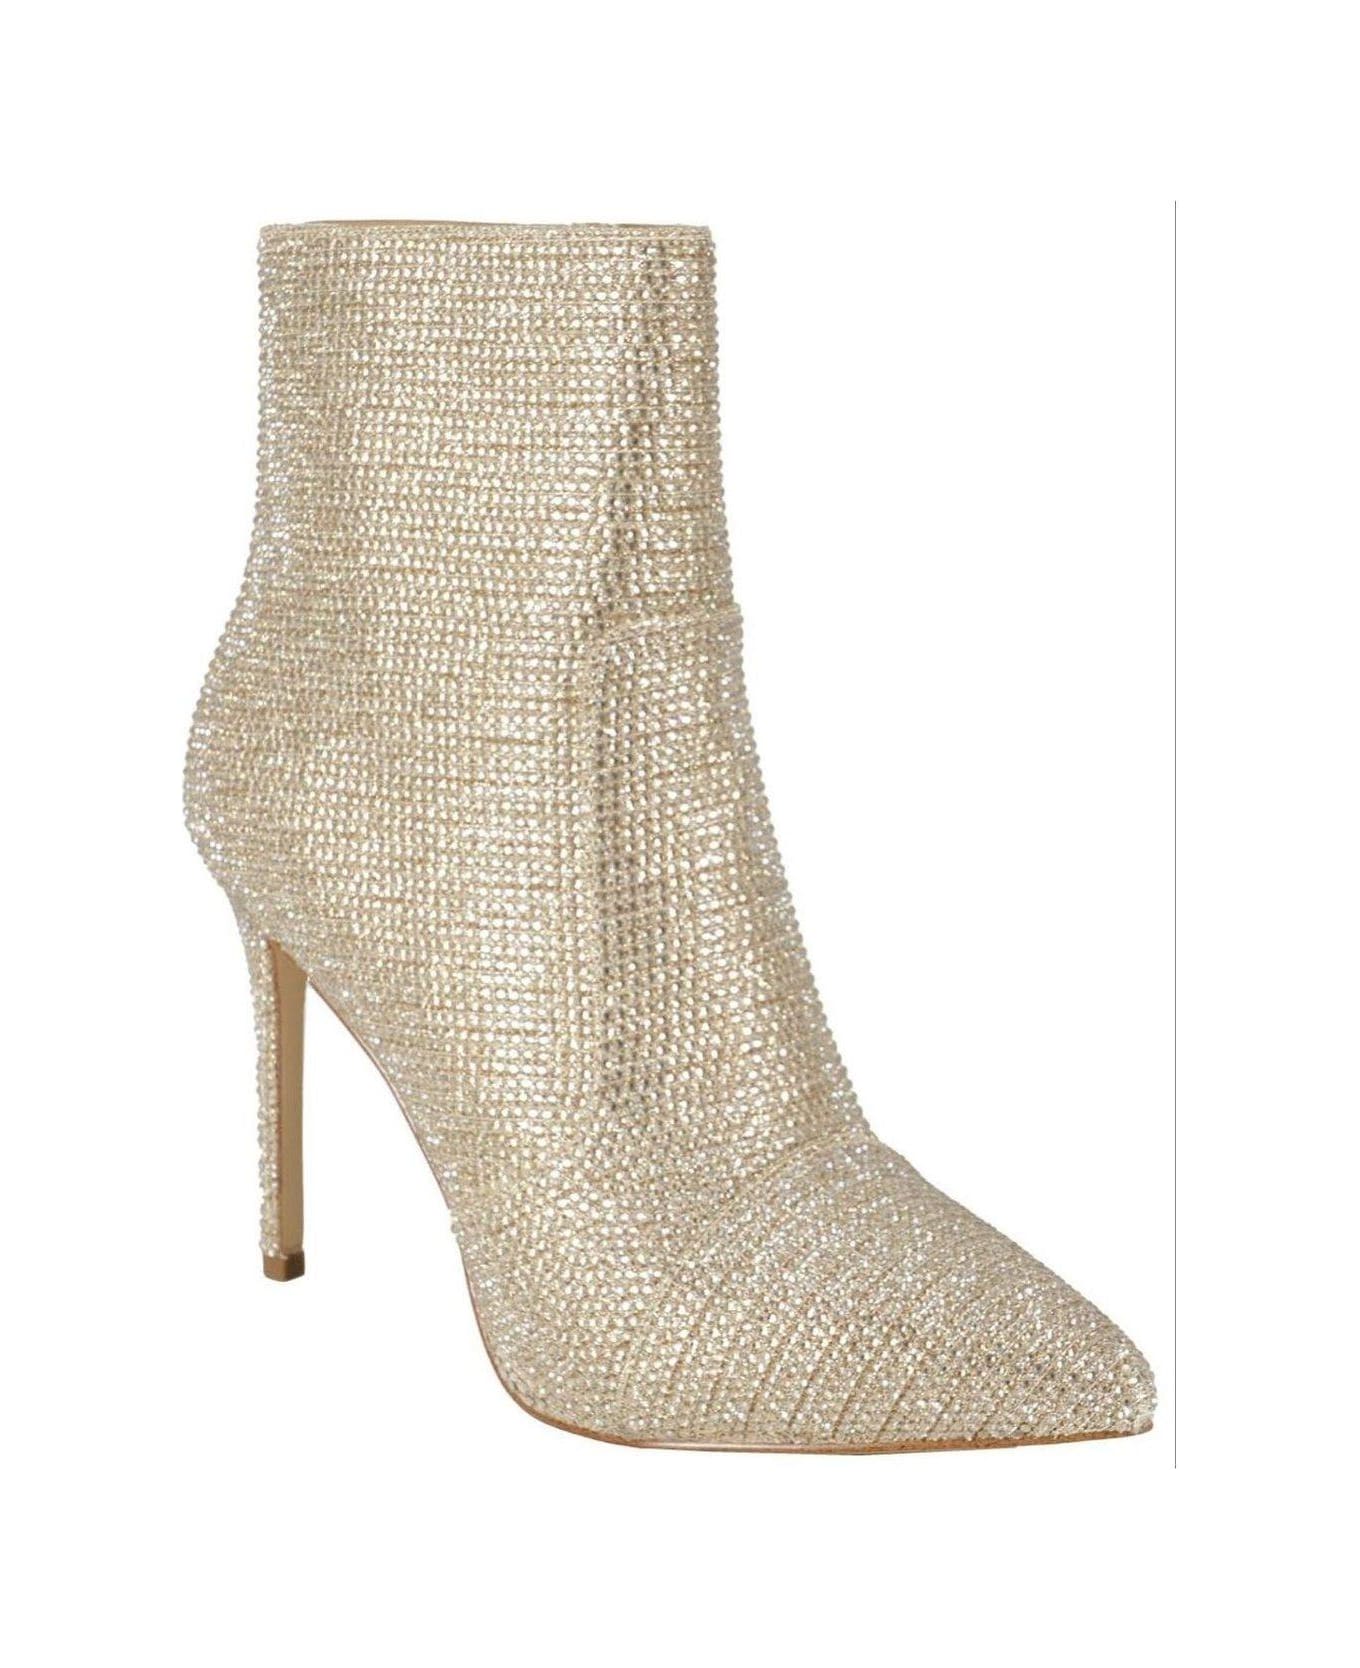 Michael Kors Rue Glitter Embellished Heeled Ankle Boots - Pale Gold ブーツ